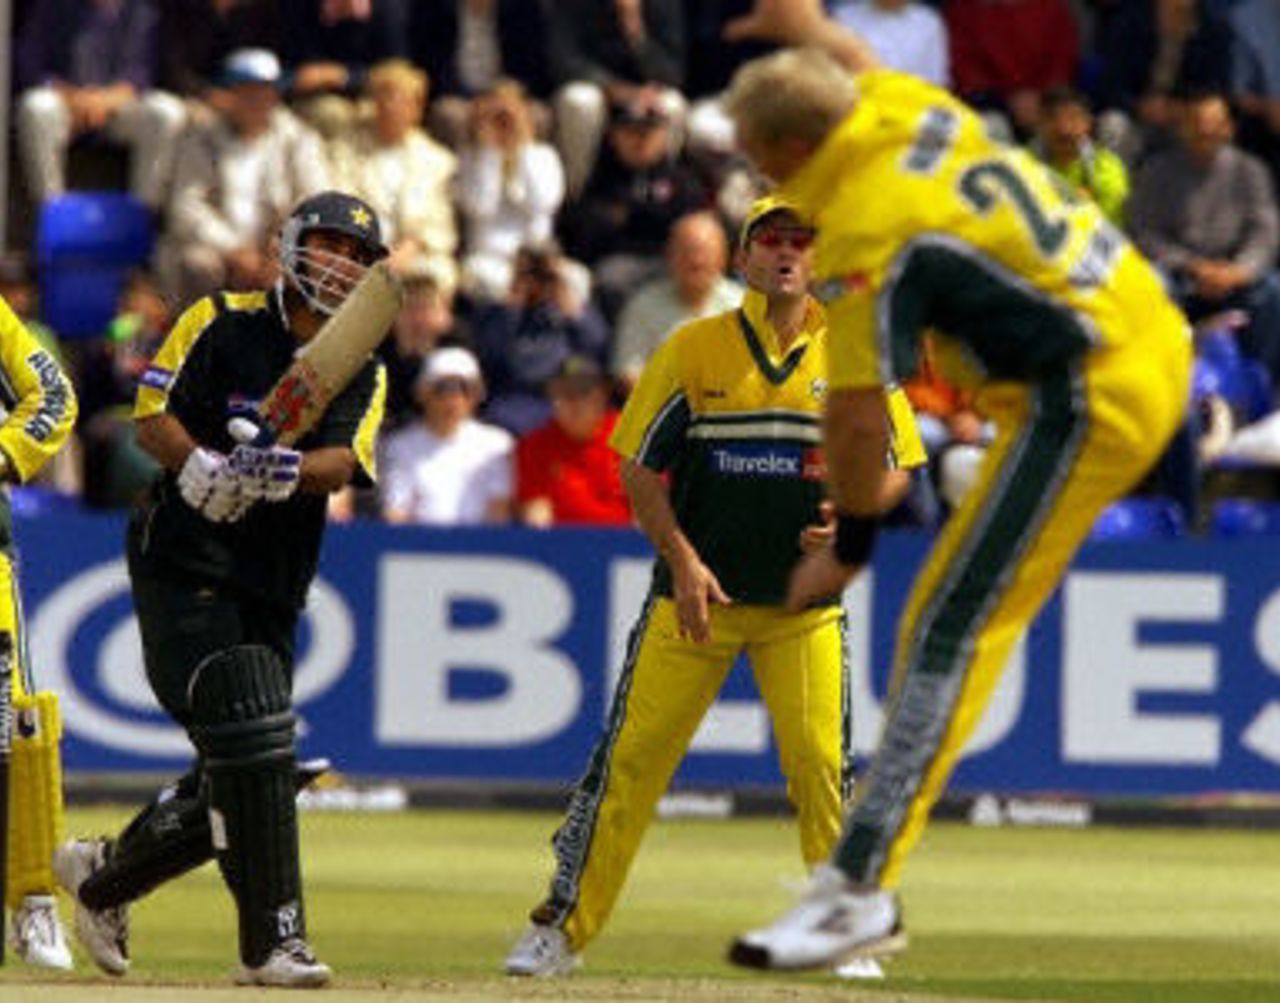 Saeed Anwar drives back past diving Shane Warne as Mark Waugh looks on, 2nd ODI at Cardiff, 9 June 2001.